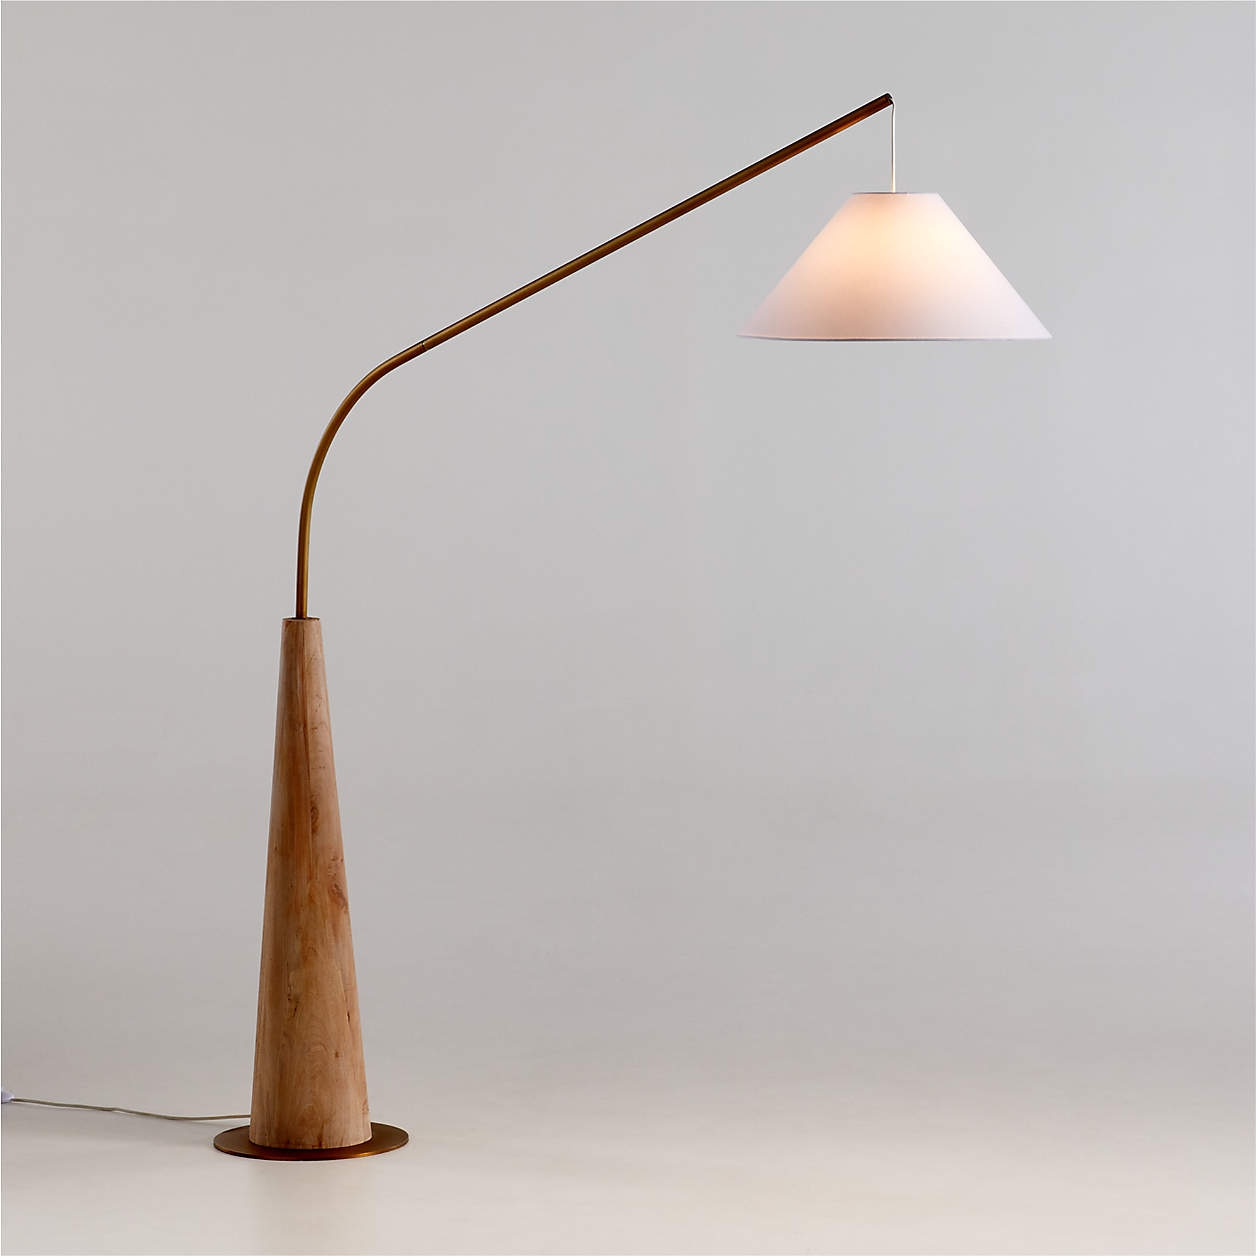 Gibson Wood Hanging Arc Floor Lamp with White Shade - Image 3